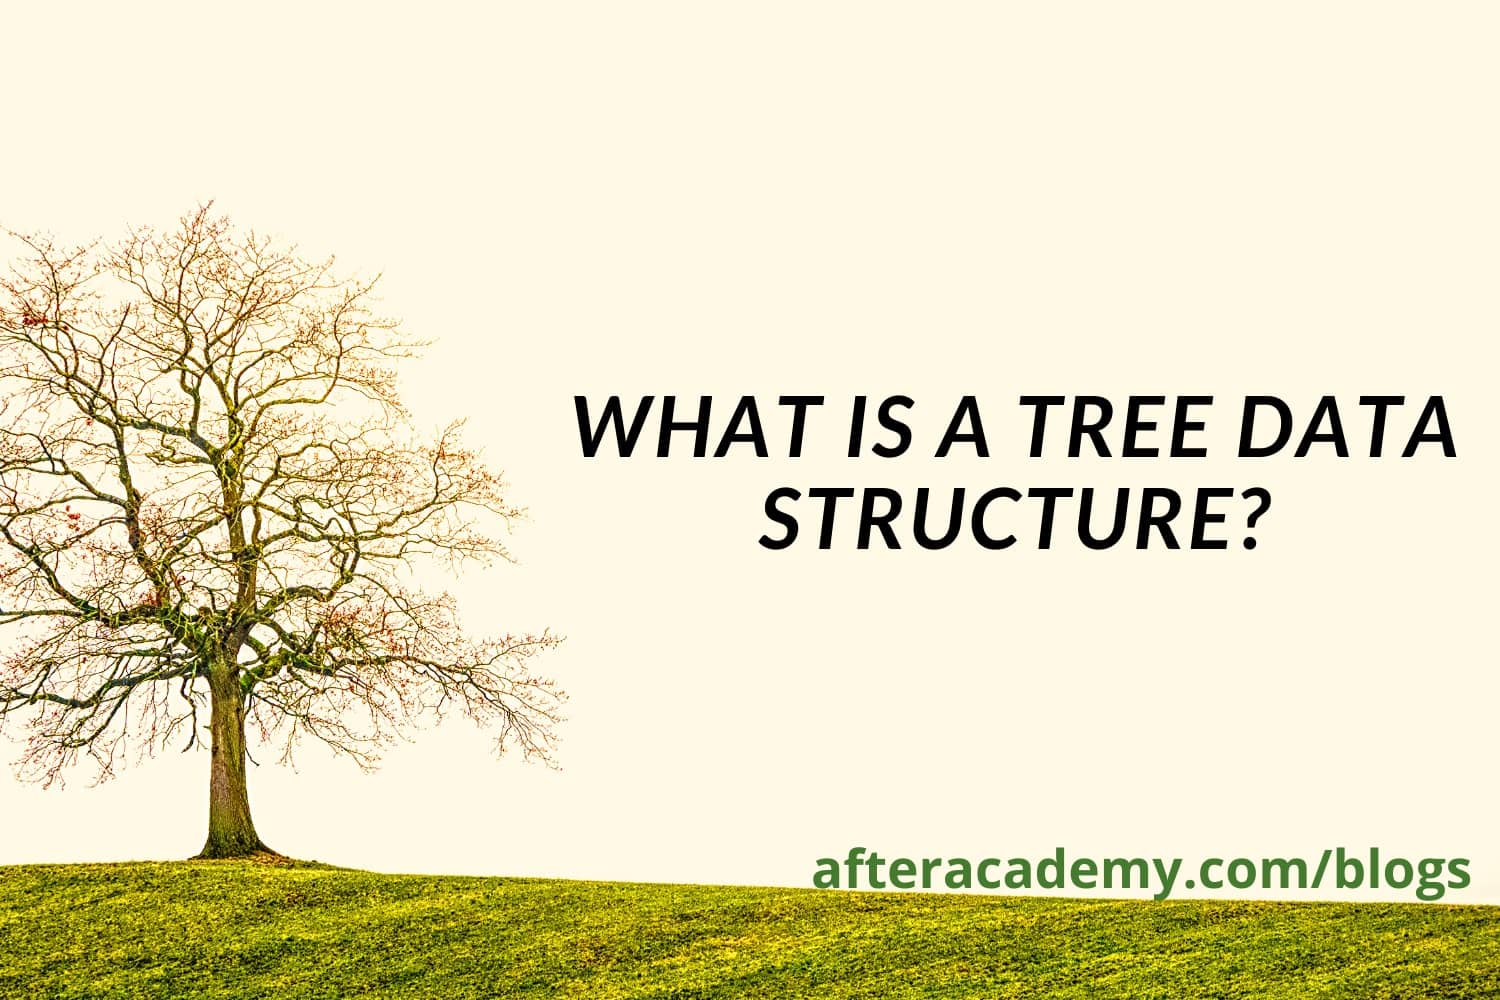 What is a tree data structure?